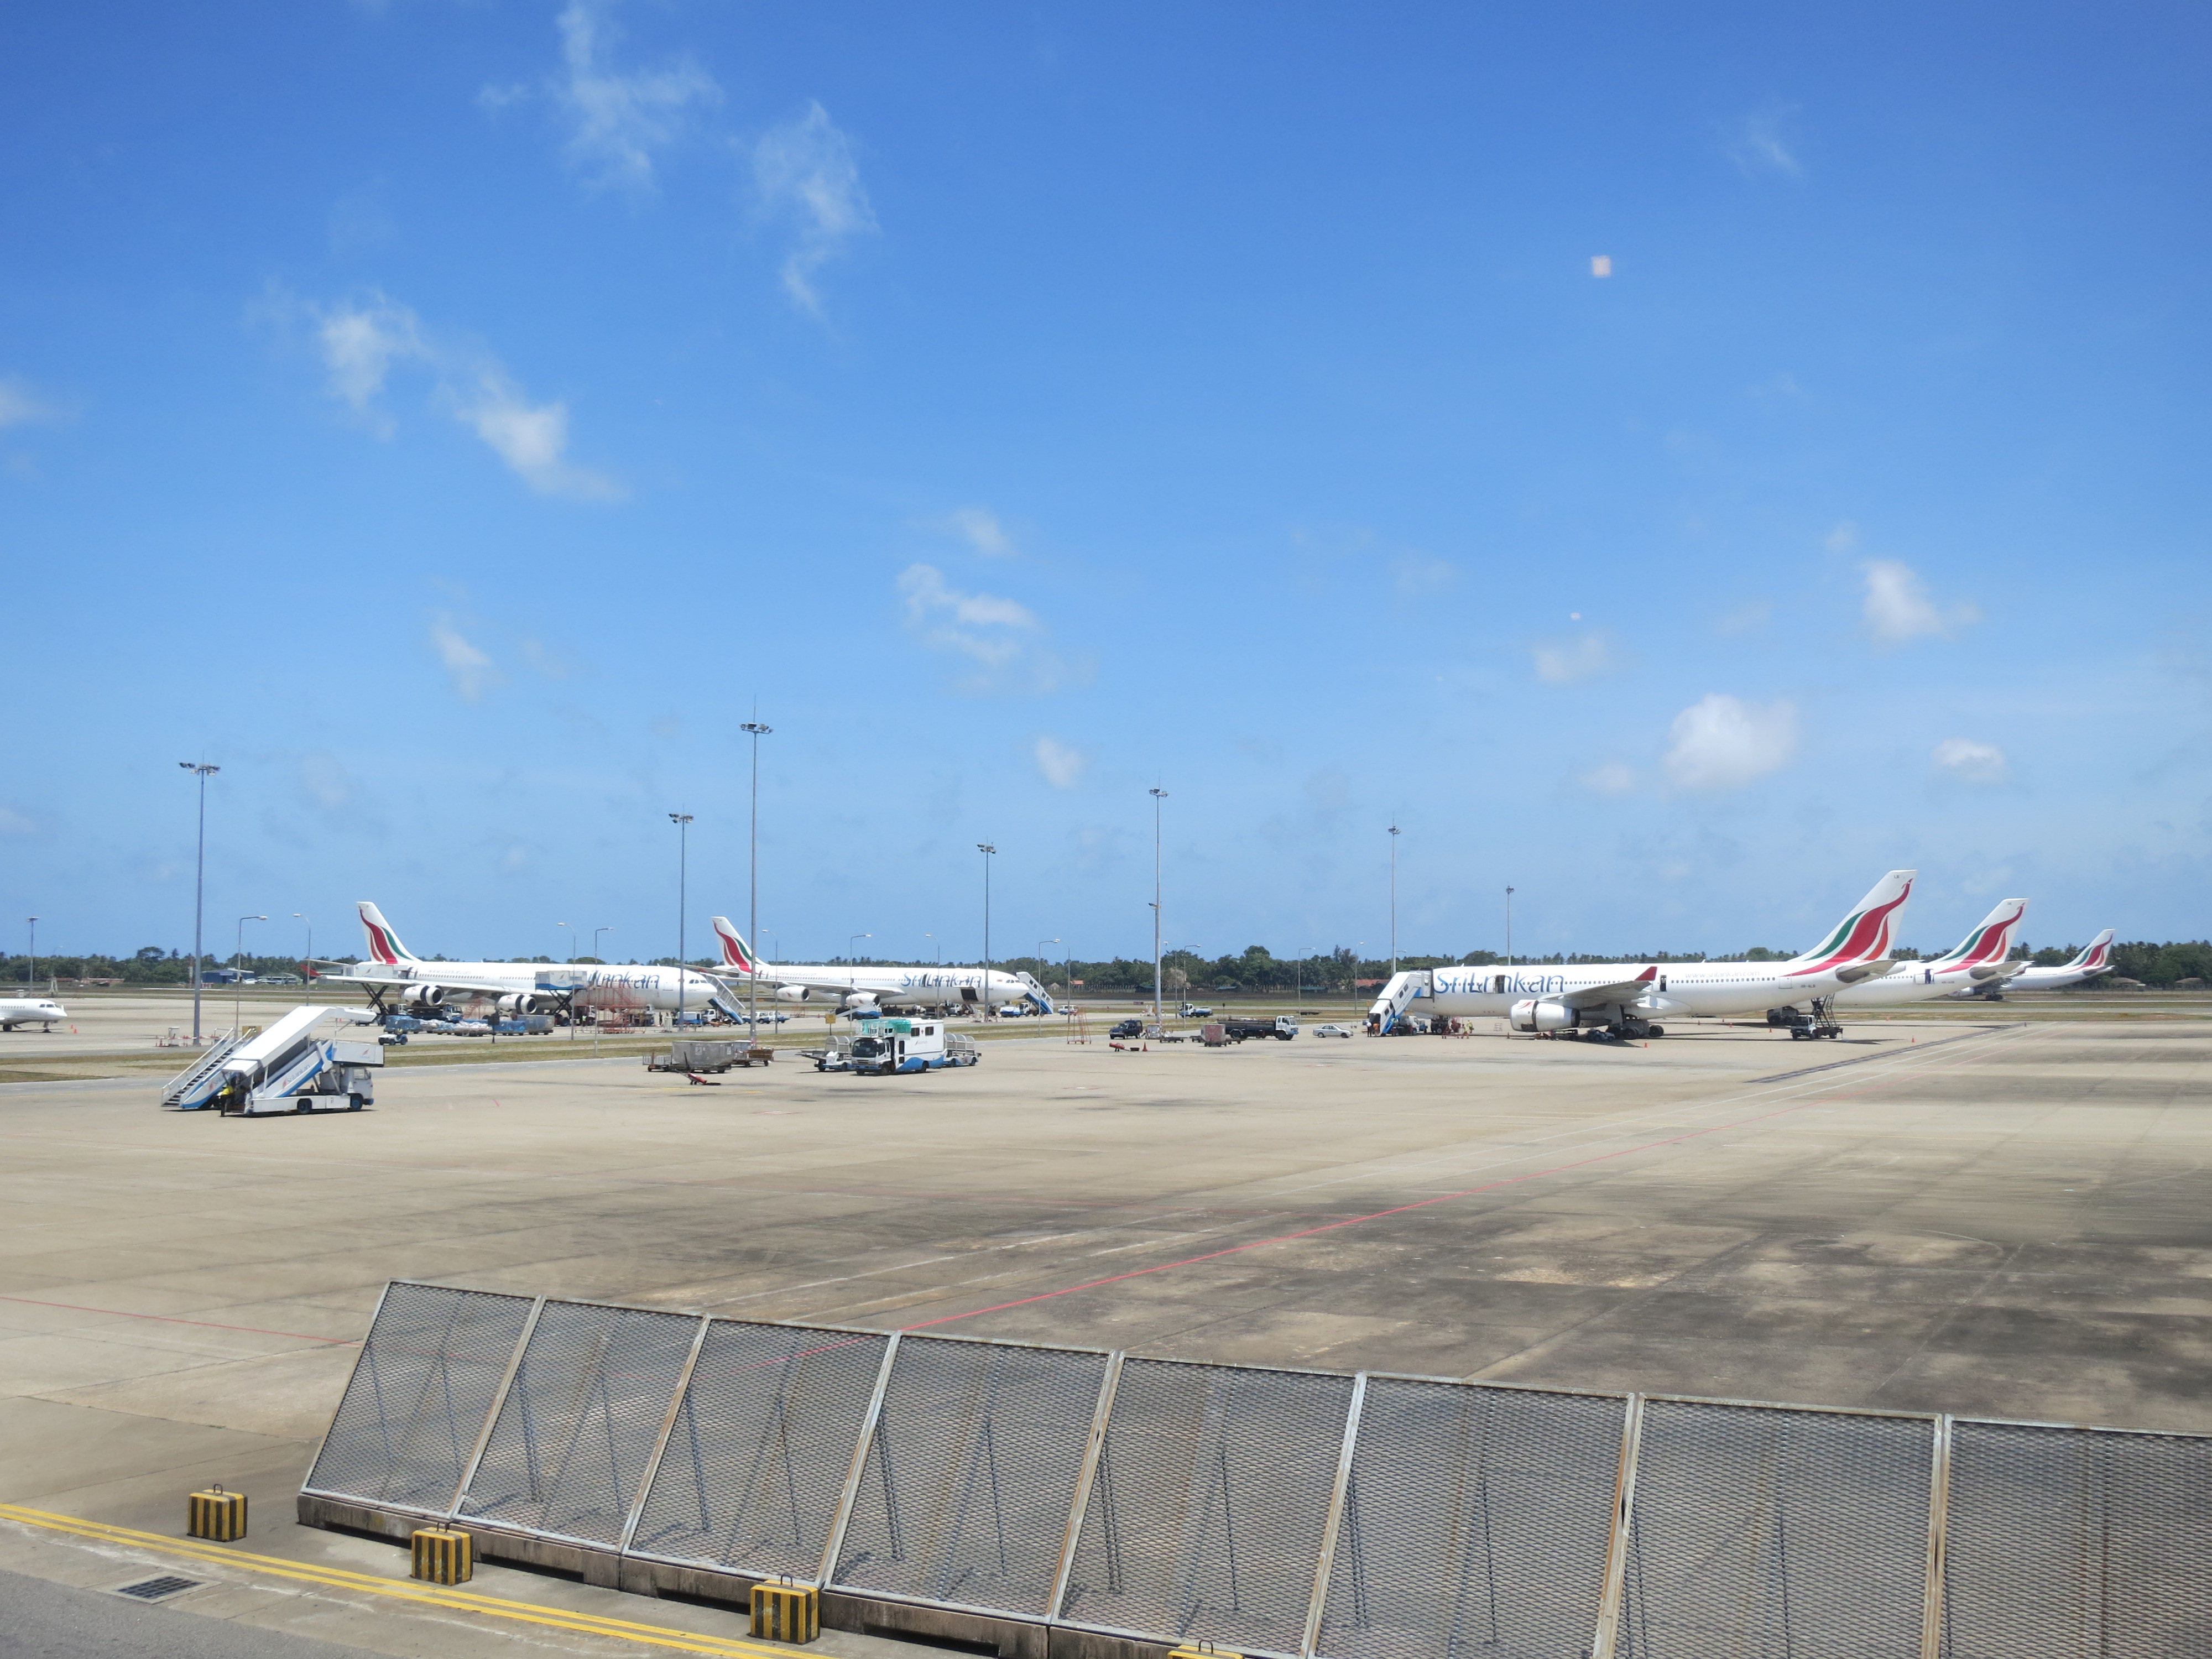 File:Colombo Airport view.JPG - Wikimedia Commons